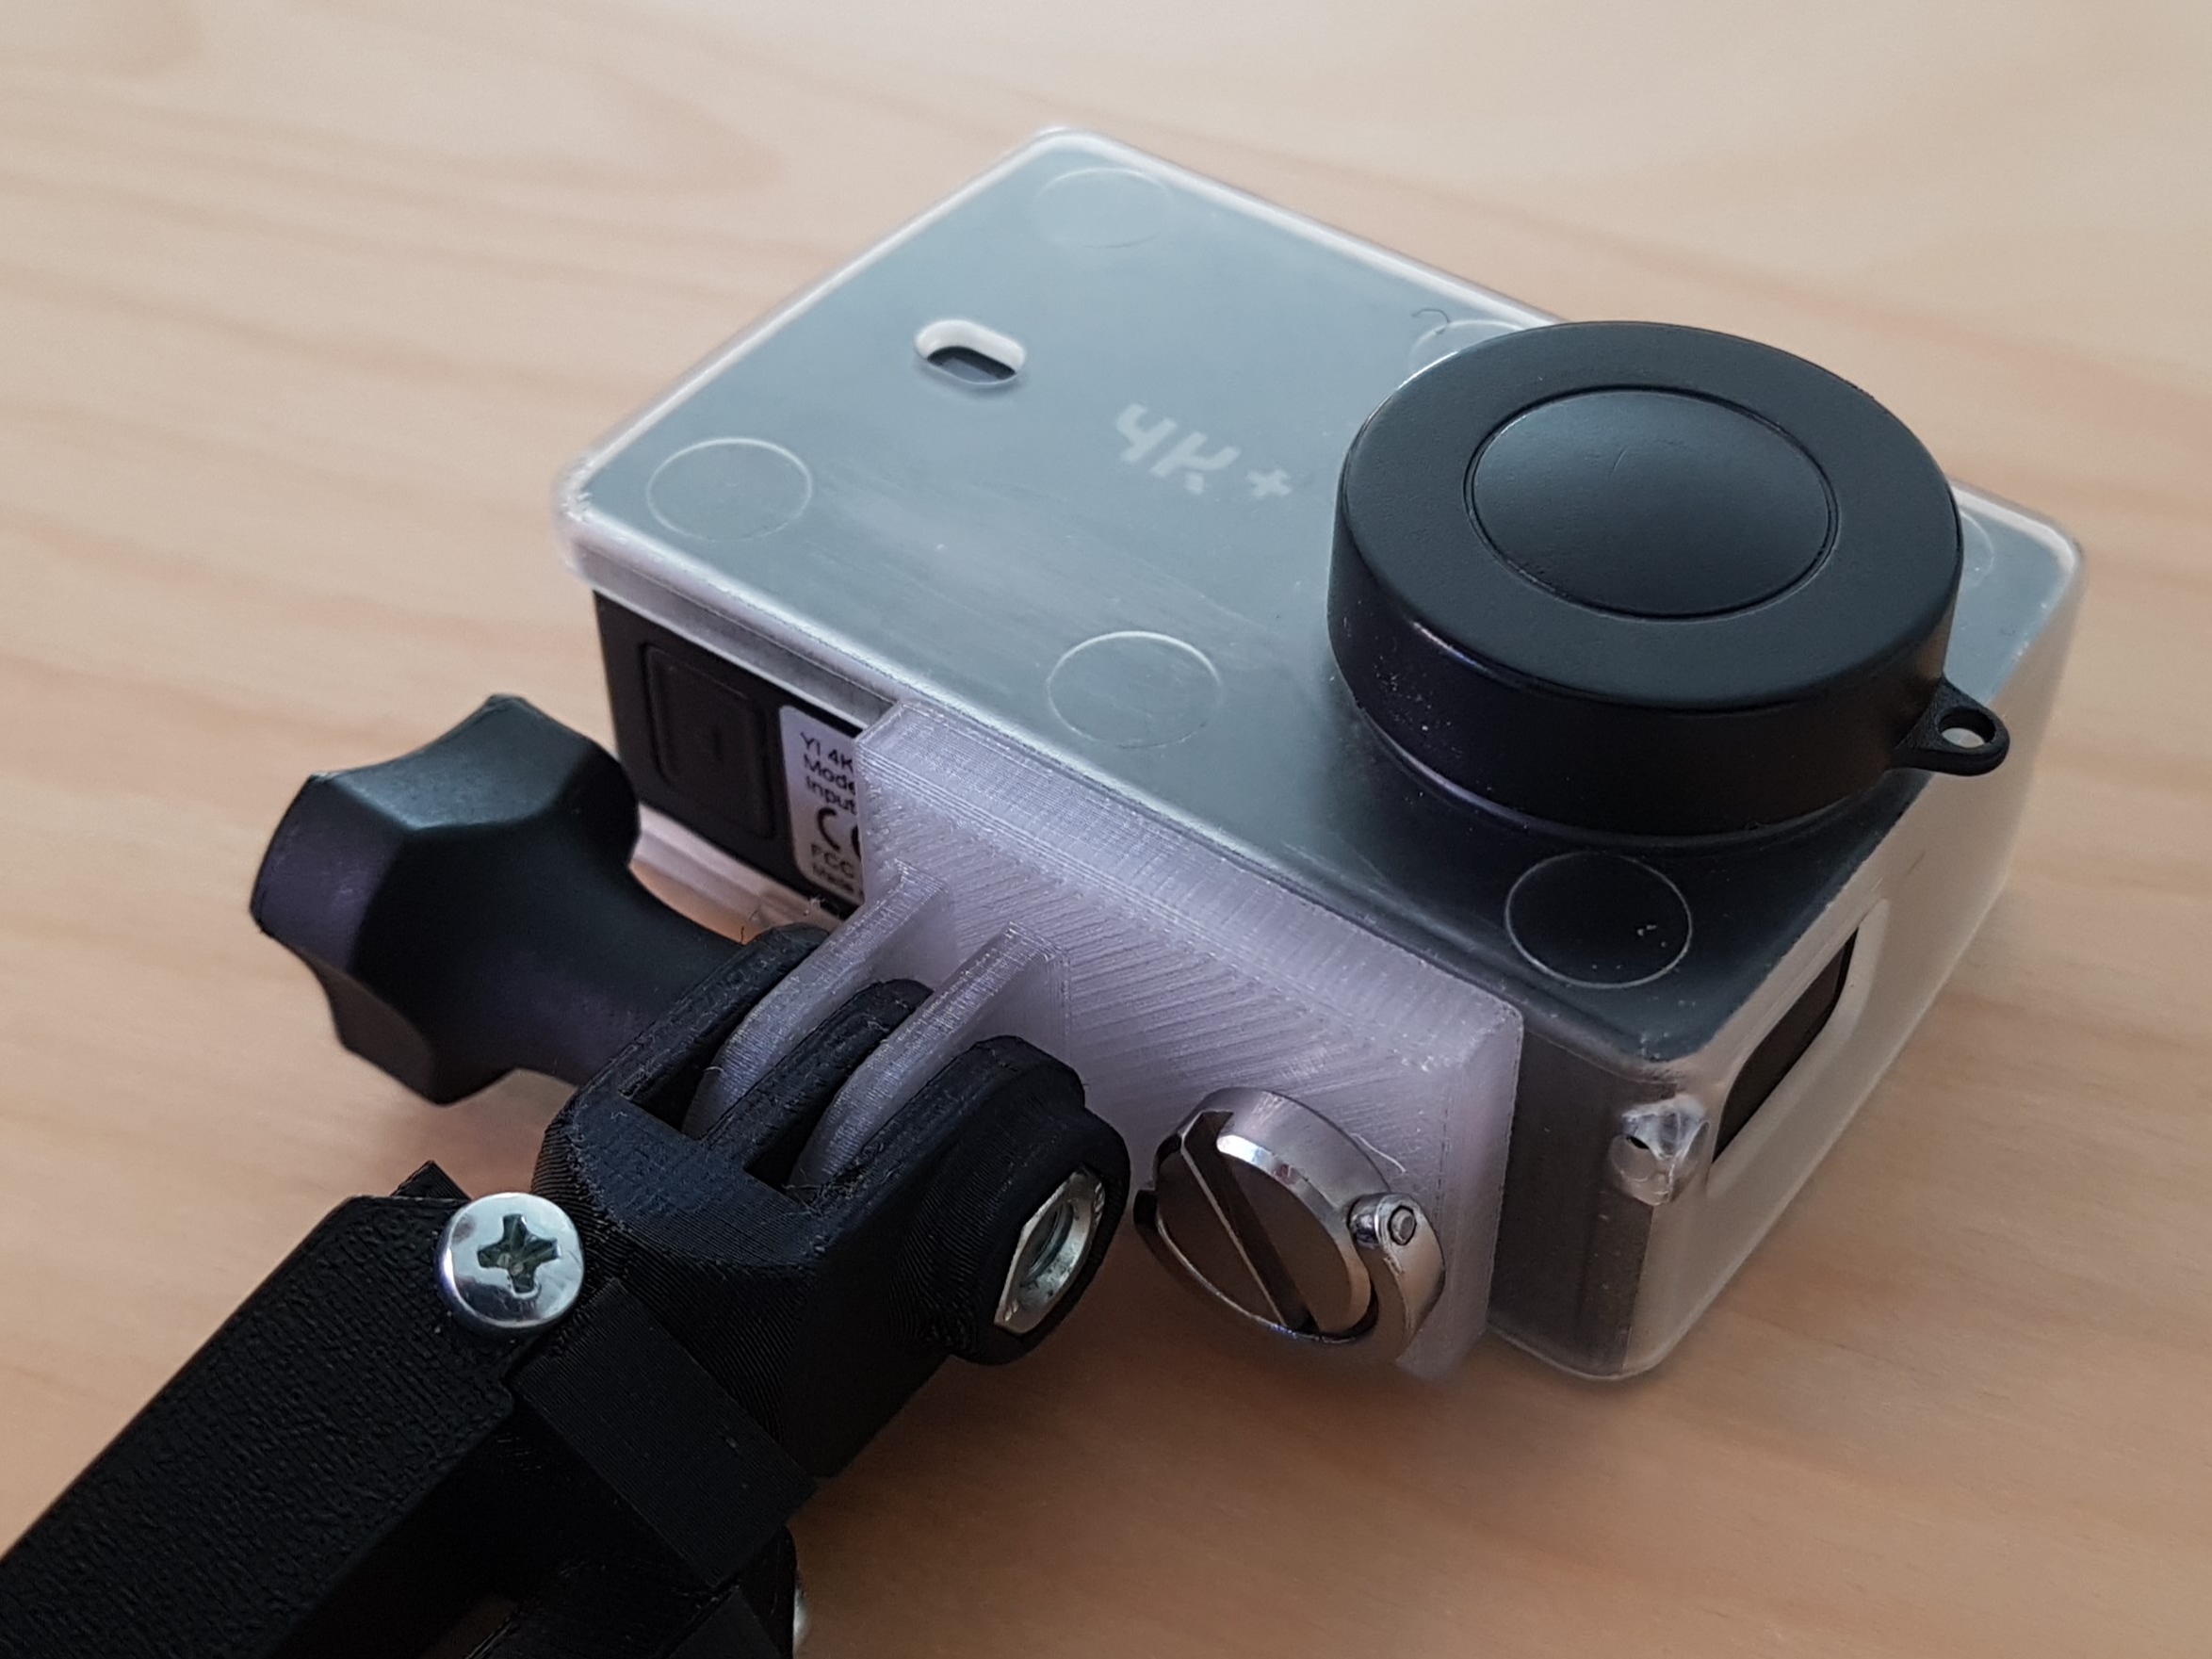 Quarter inch mount to GoPro style adapter